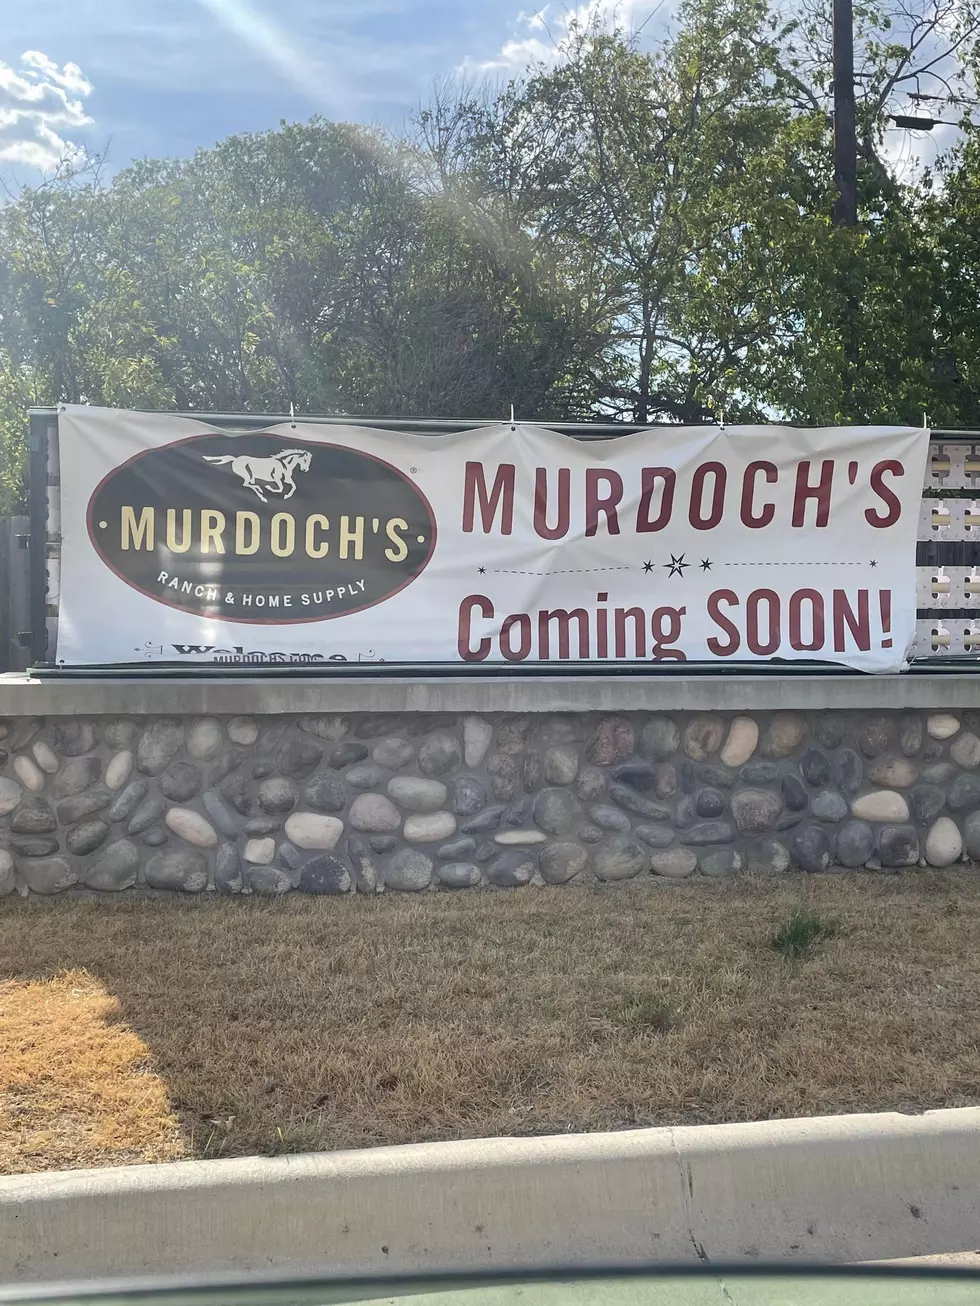 Saddle Up Killeen, Texas – Murdoch’s Ranch And Home Supply Is Coming To Town